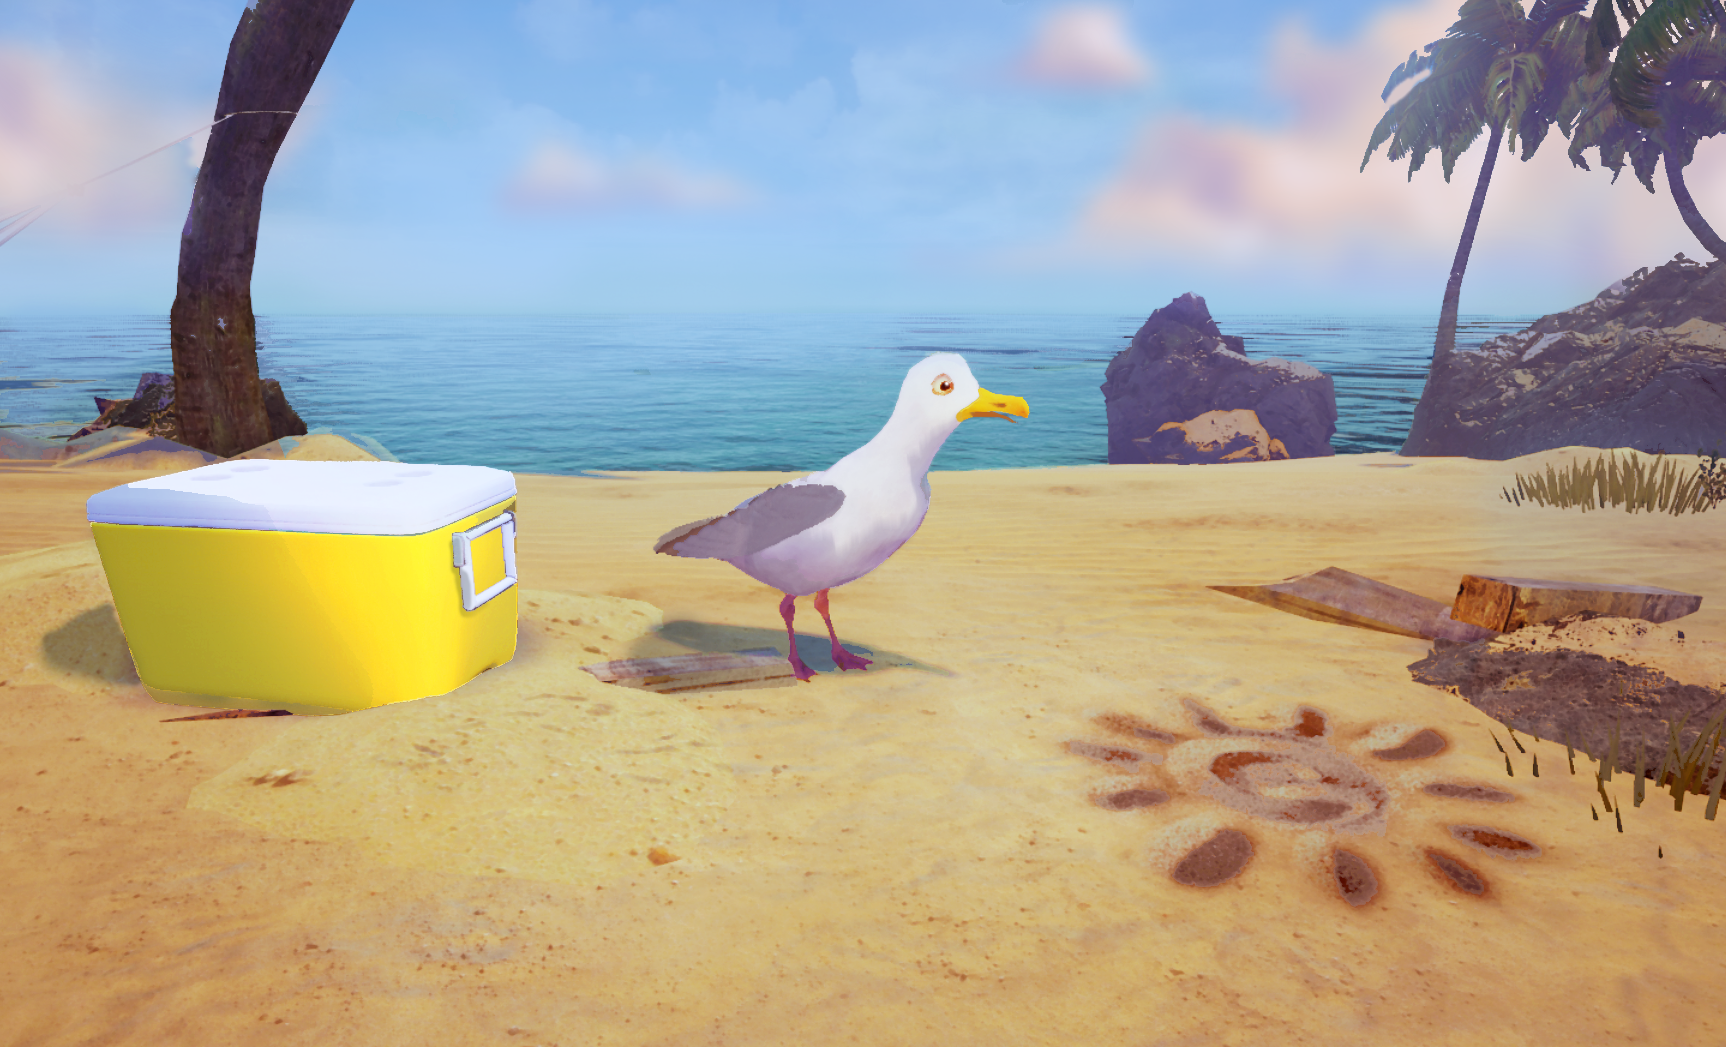 Motional and Limitless created an interactive animated short film in VR called “Gary the Gull,” which will debut at the 2016 Game Developers Conference in San Francisco next week, March 14-18, 2016.